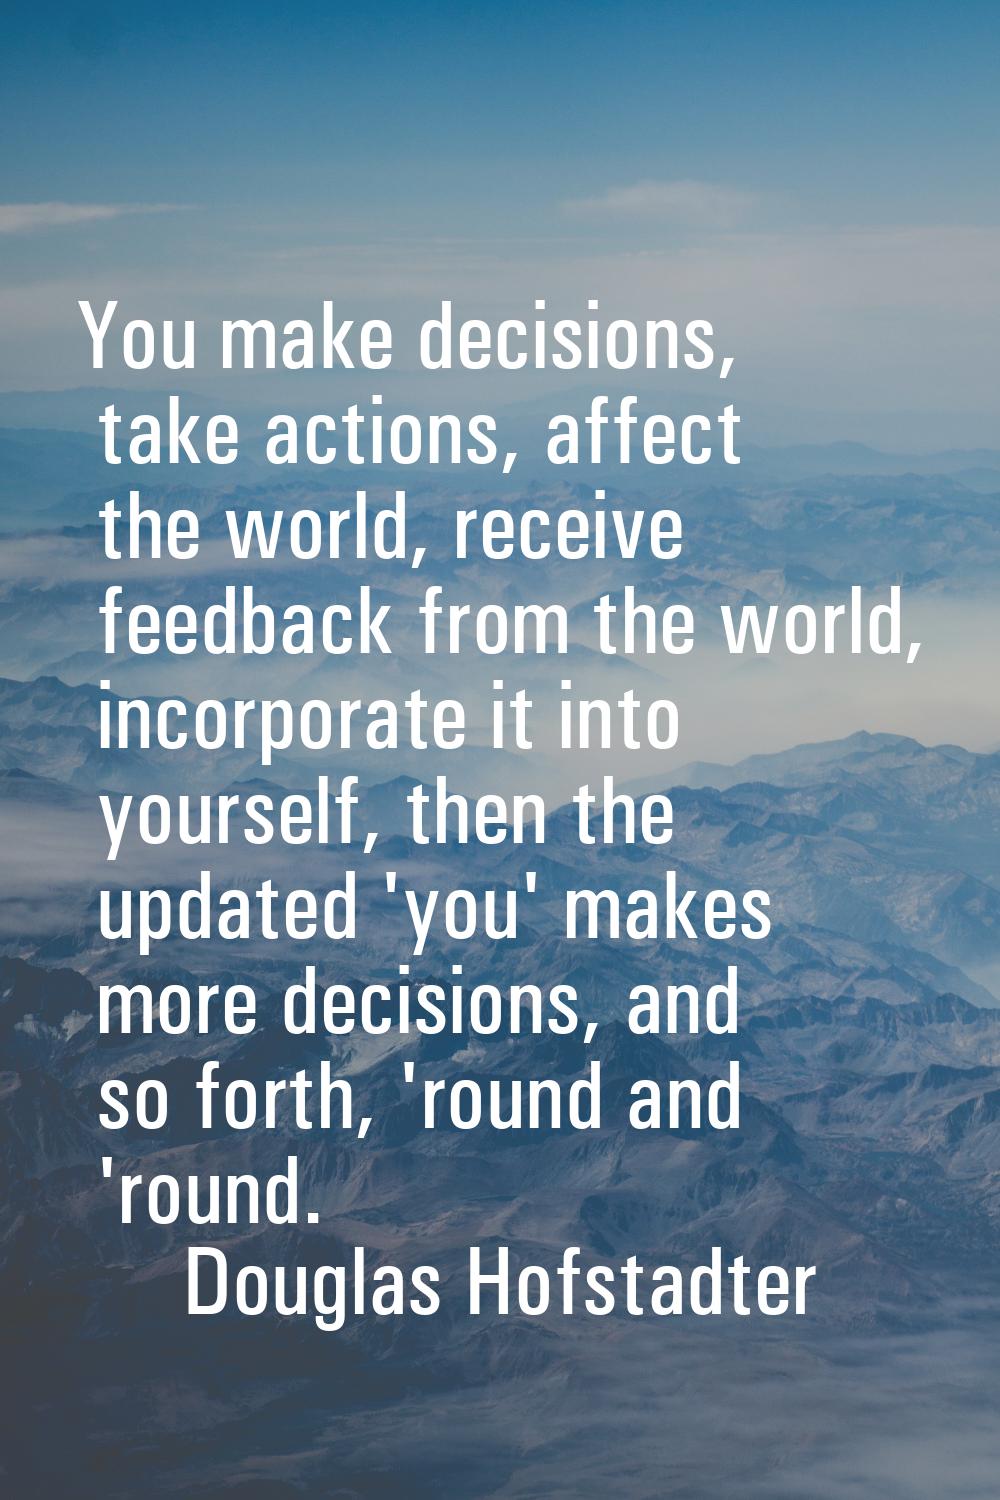 You make decisions, take actions, affect the world, receive feedback from the world, incorporate it